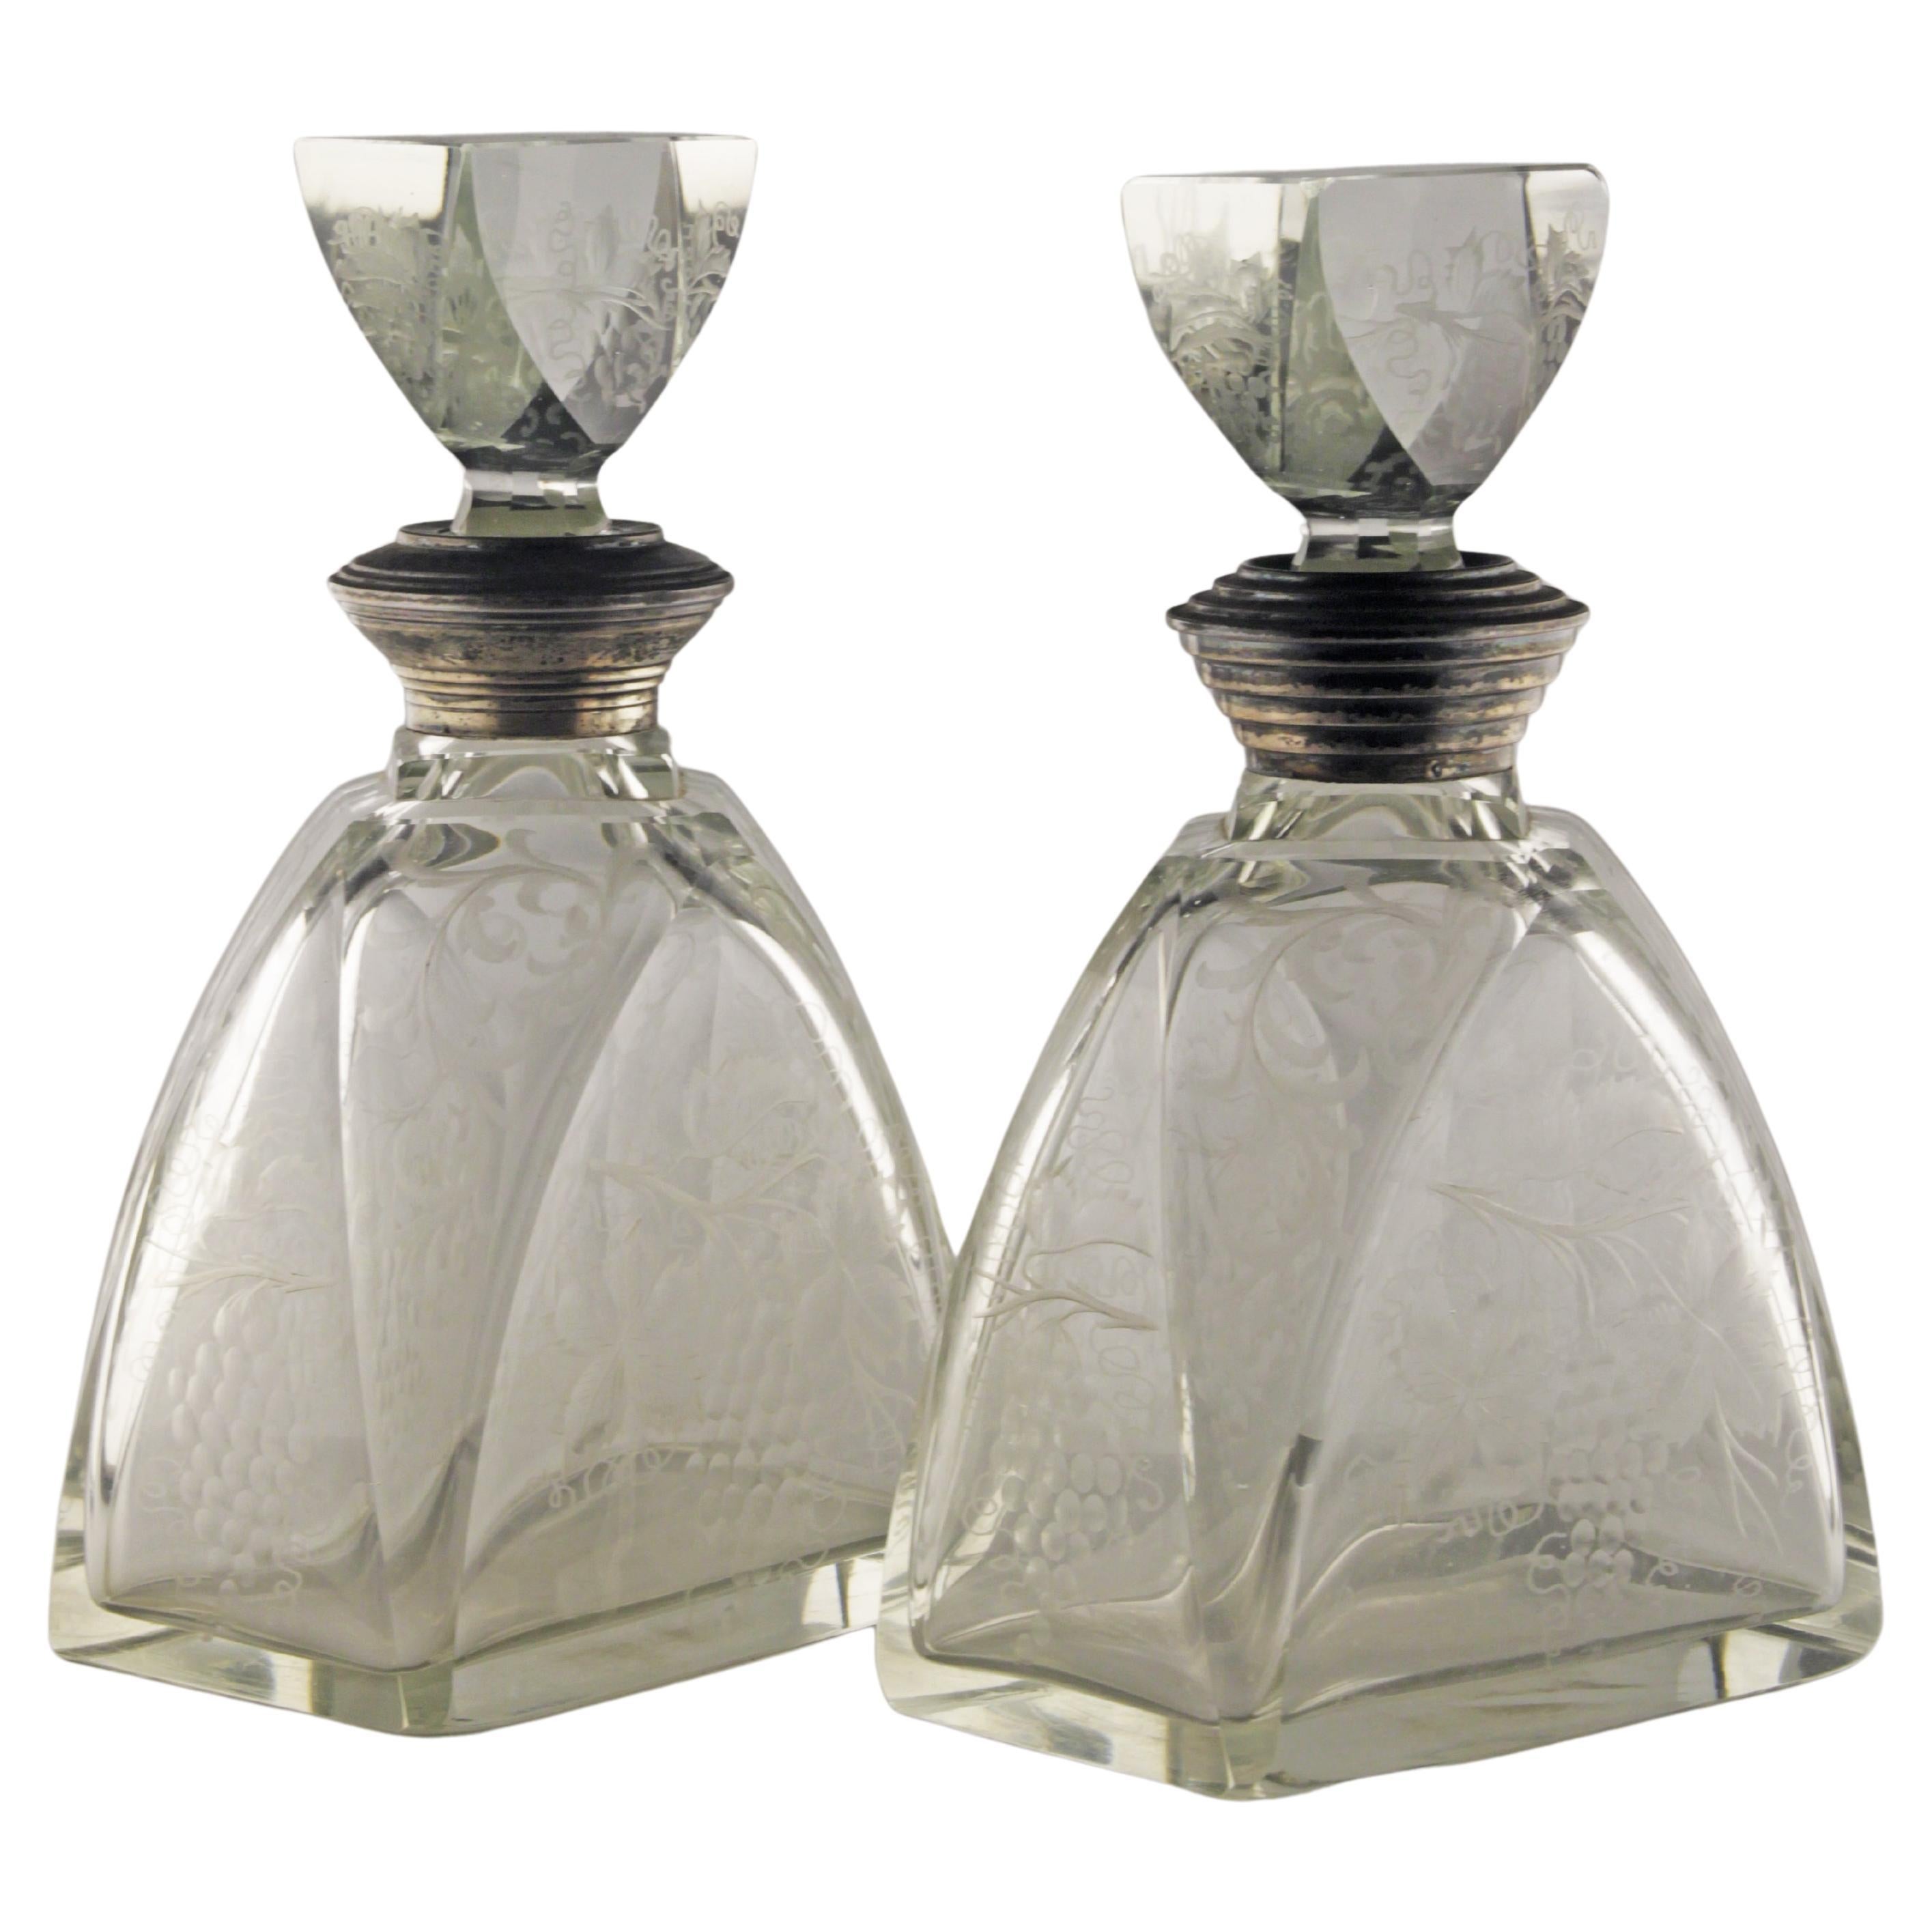 Pair of Art Déco Etched Glass Liquor Decanters with Sterling Silver Necks